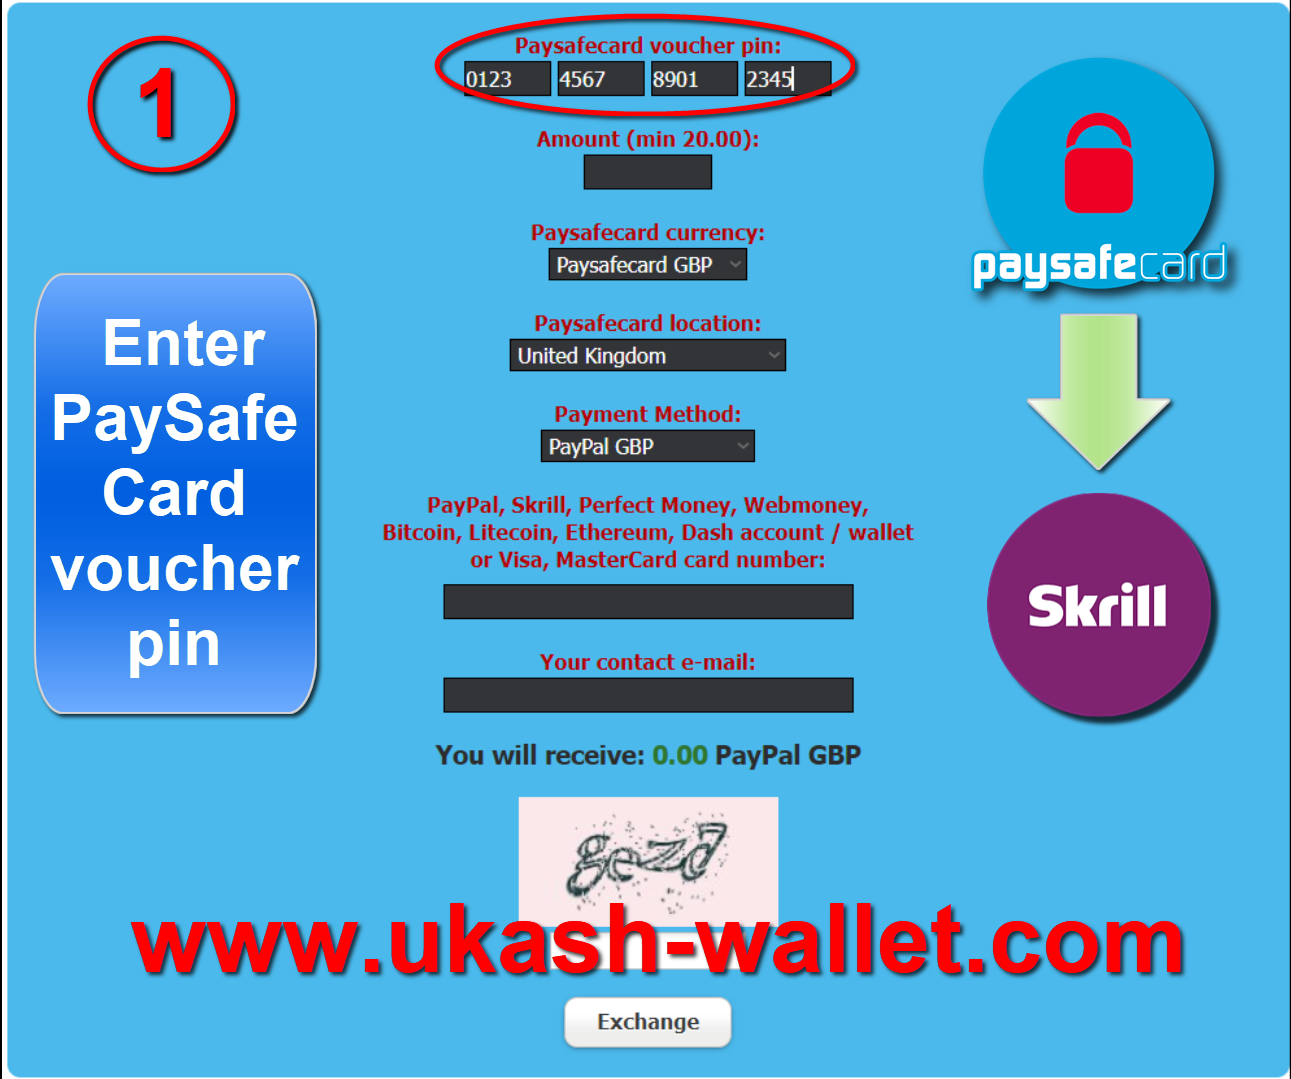 Paysafecard to Skrill exchange - Step one.